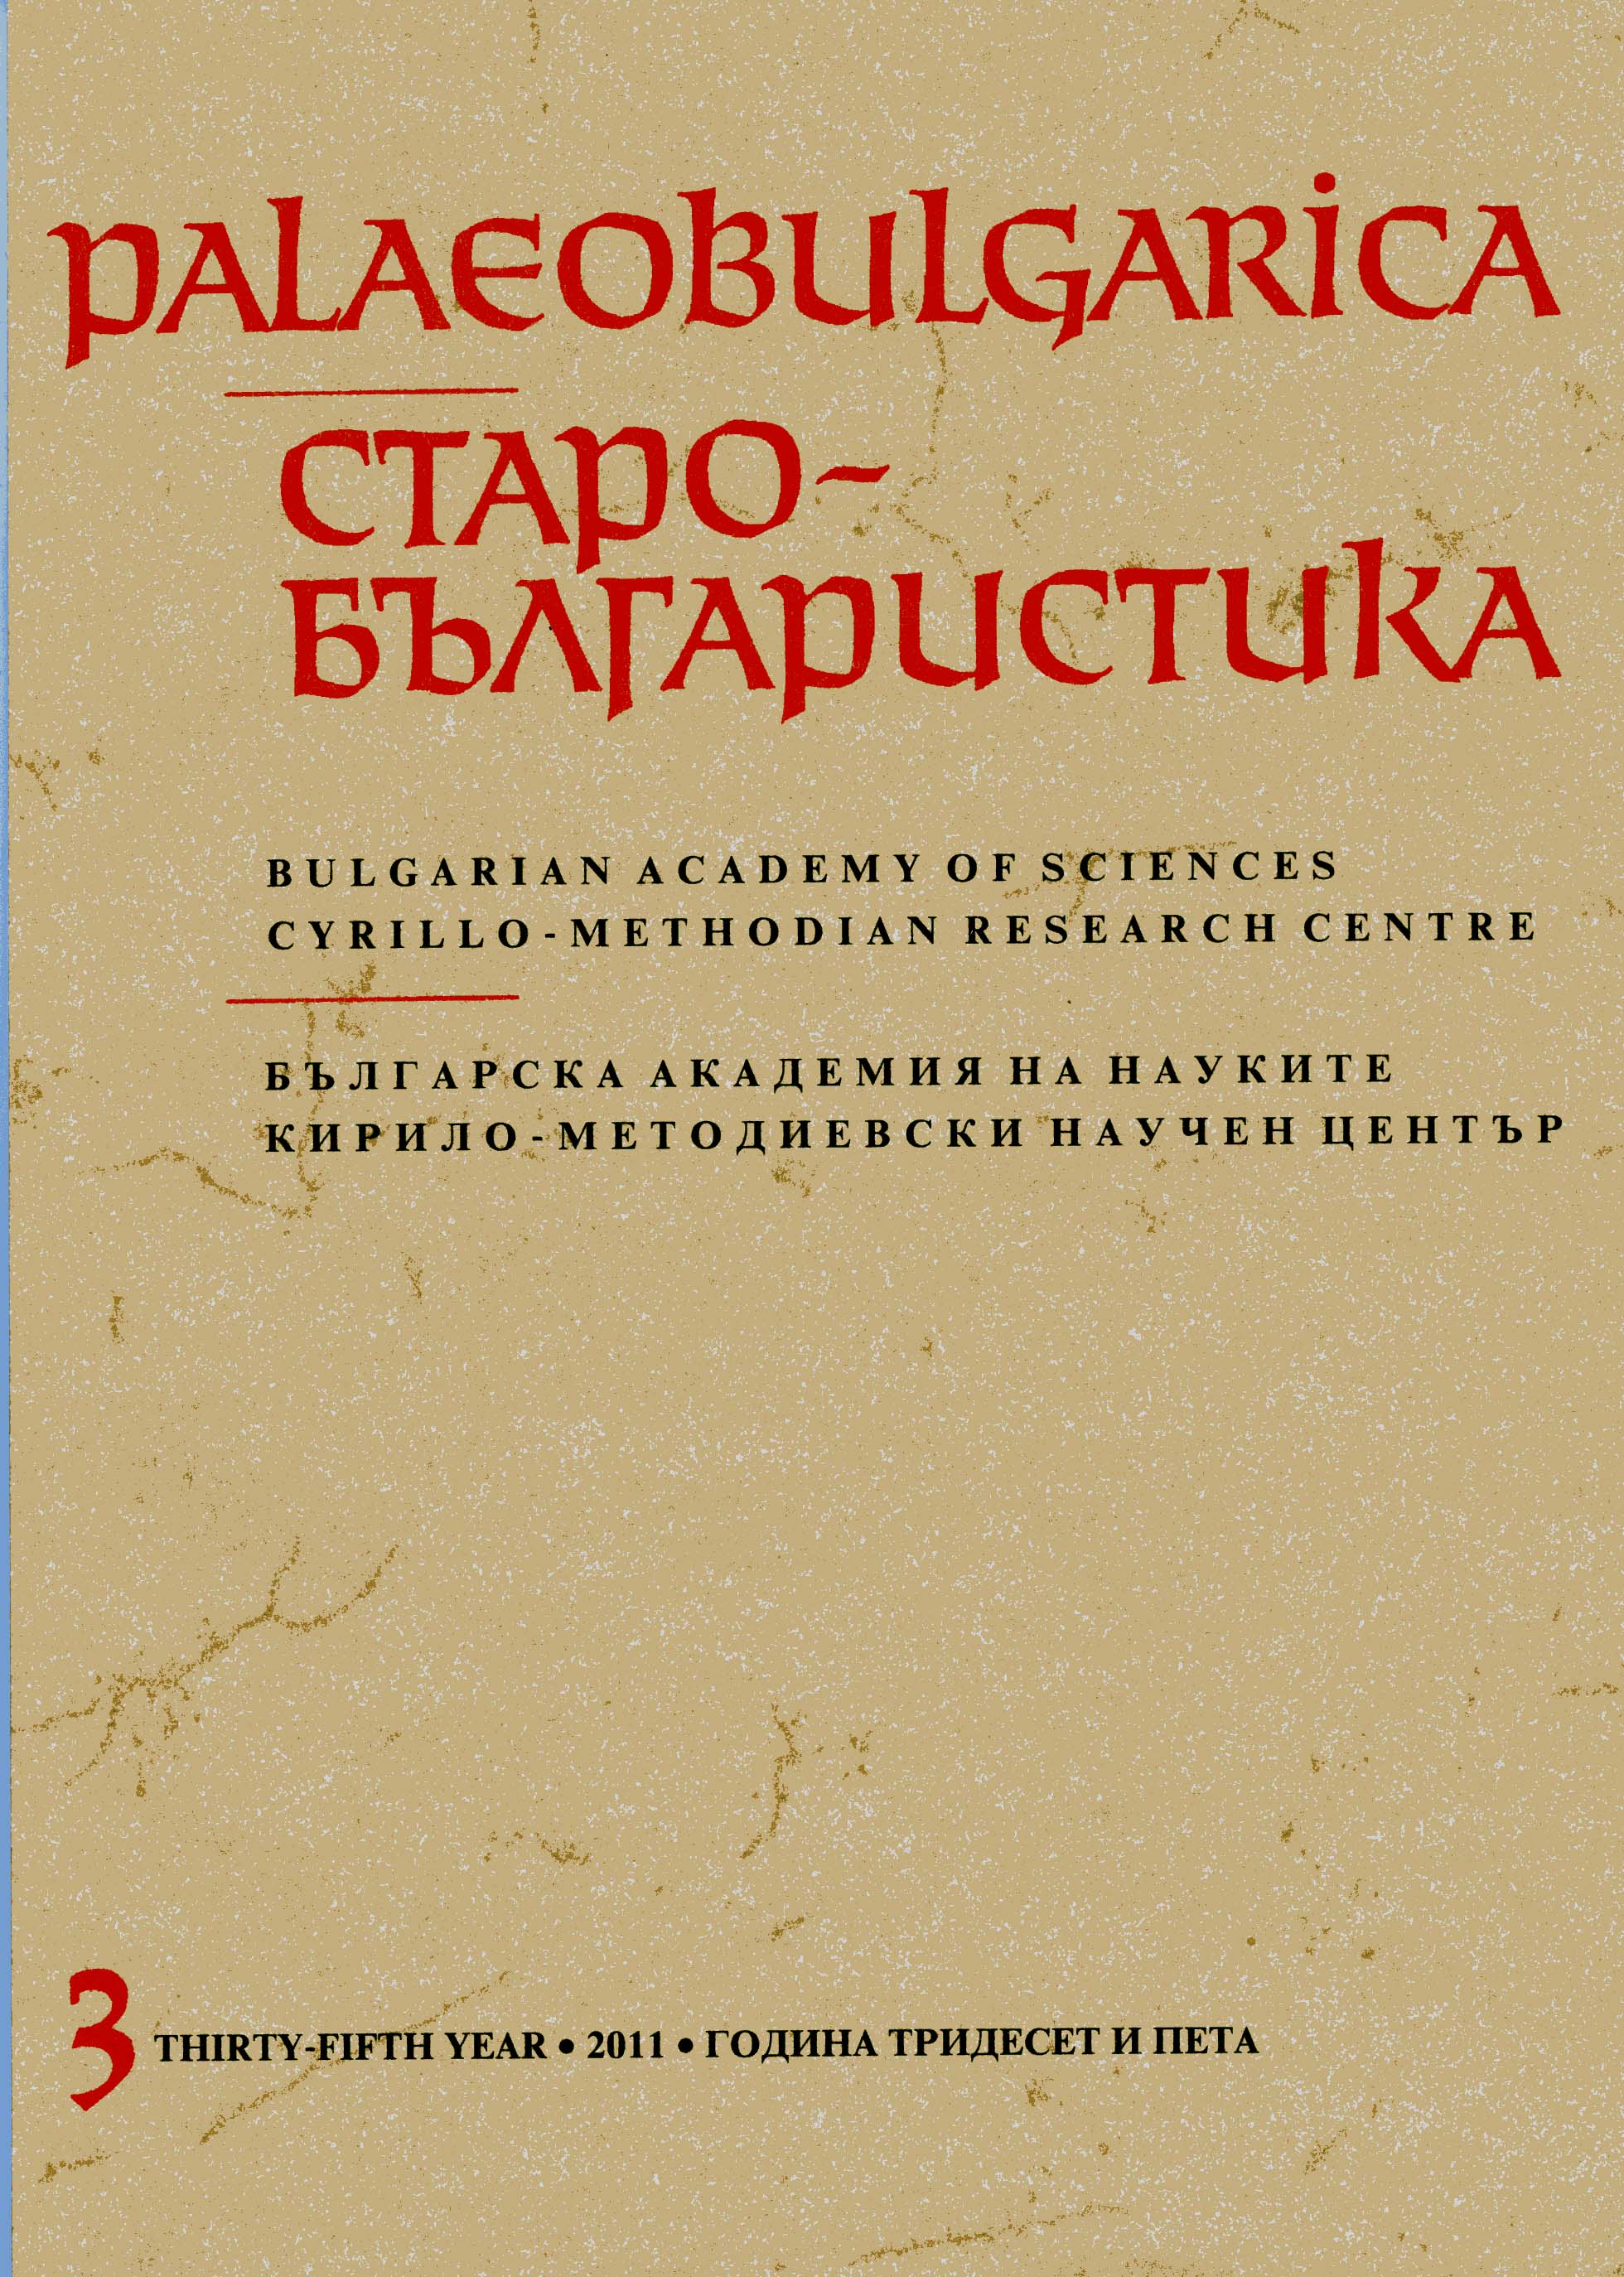 A Worthy Continuator of the Traditions of Vienna Slavonic Studies: Johannes Reinhart at 60 Cover Image